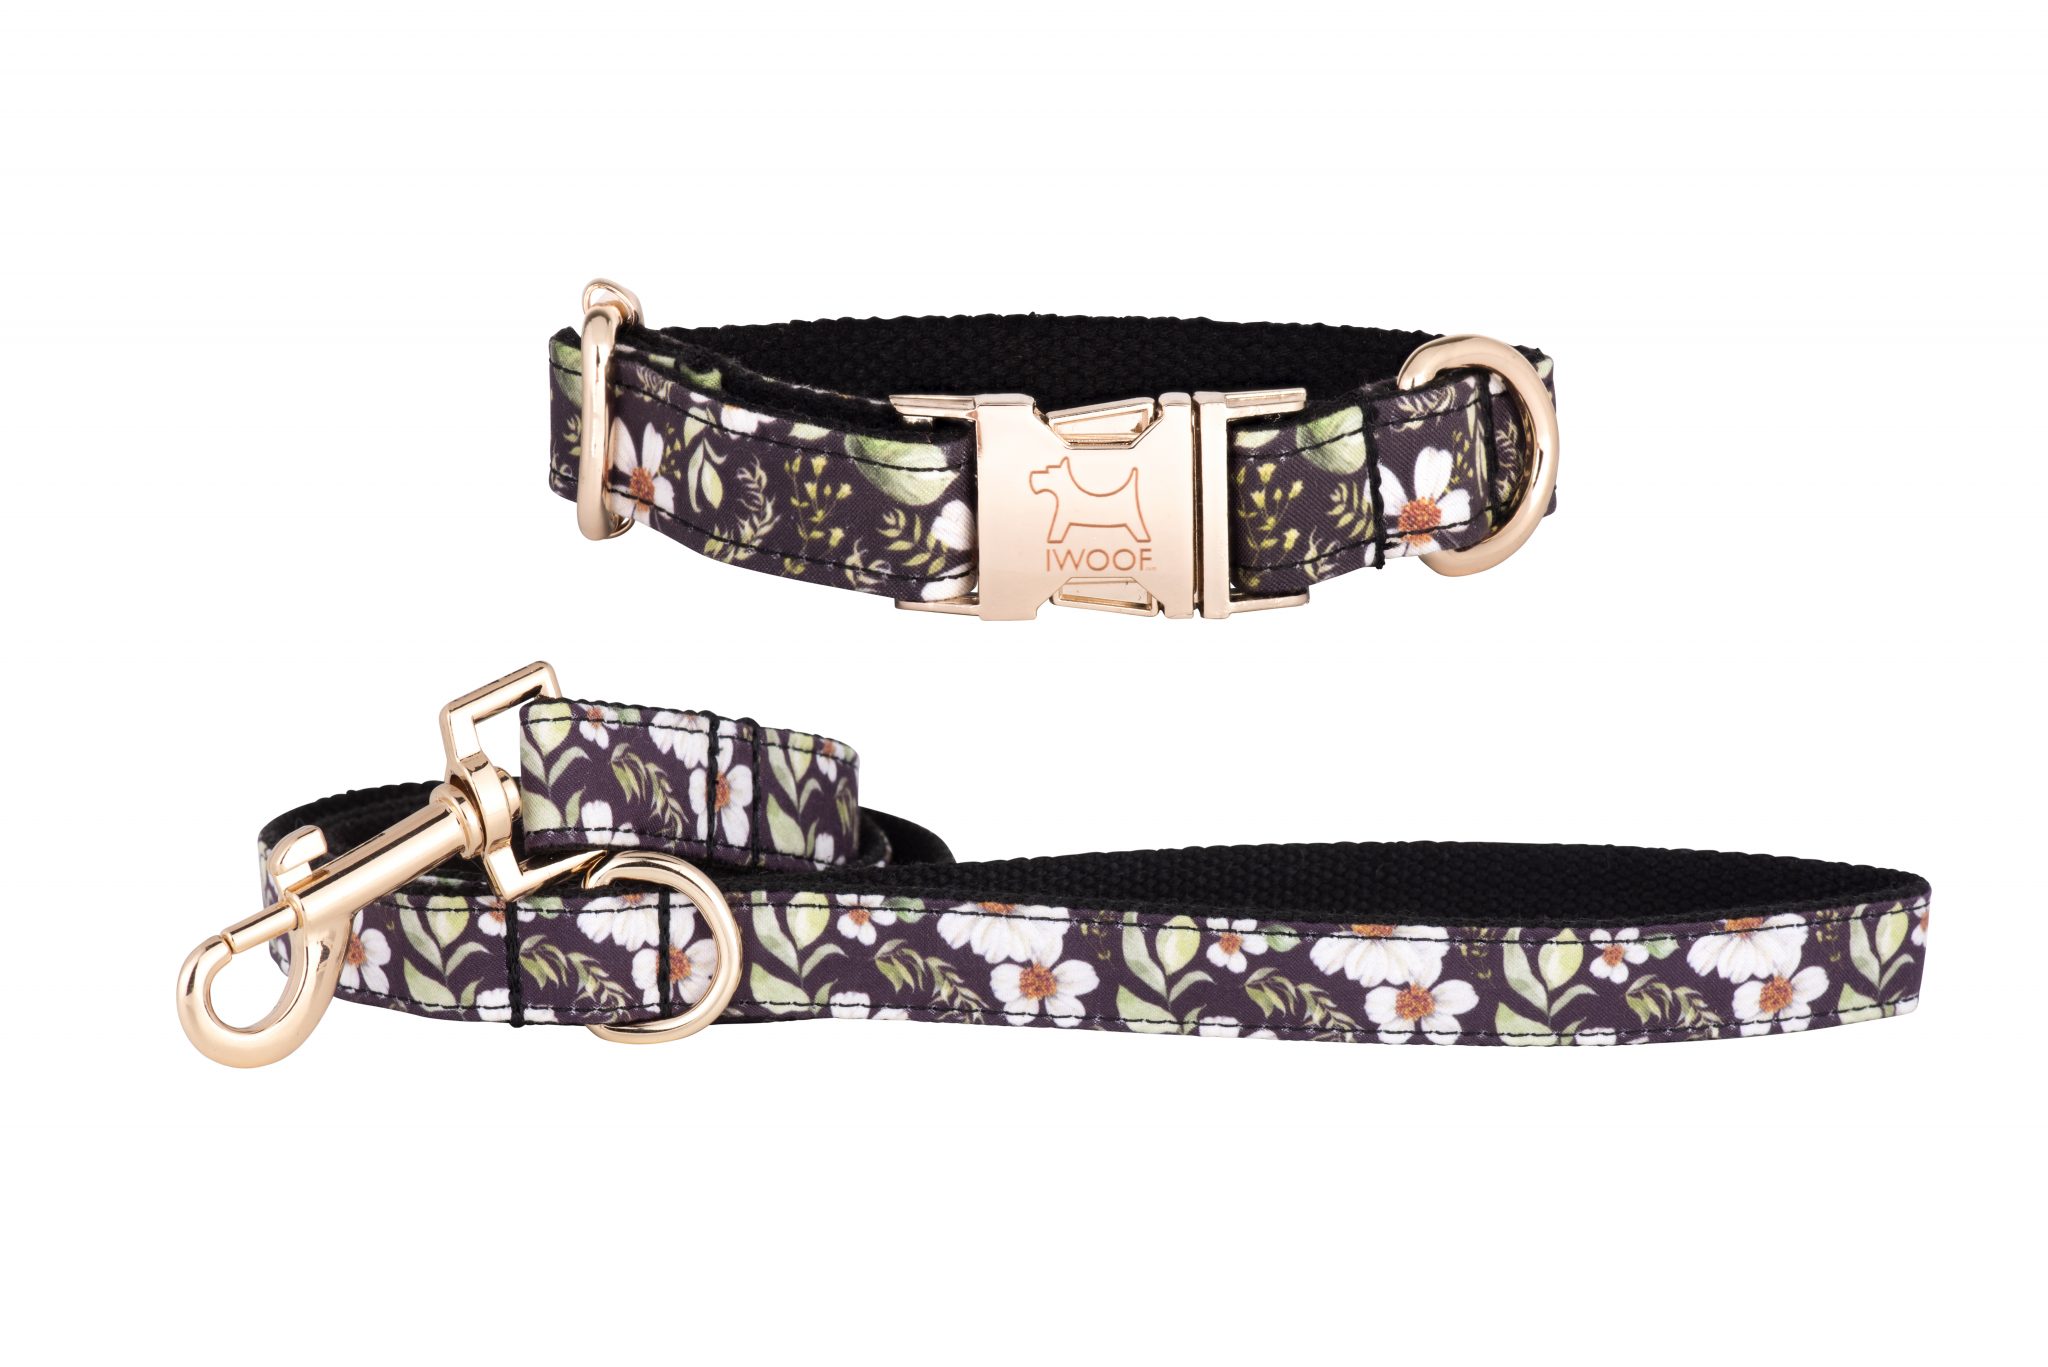 Cadgwith designer dog collar and dog lead by IWOOF